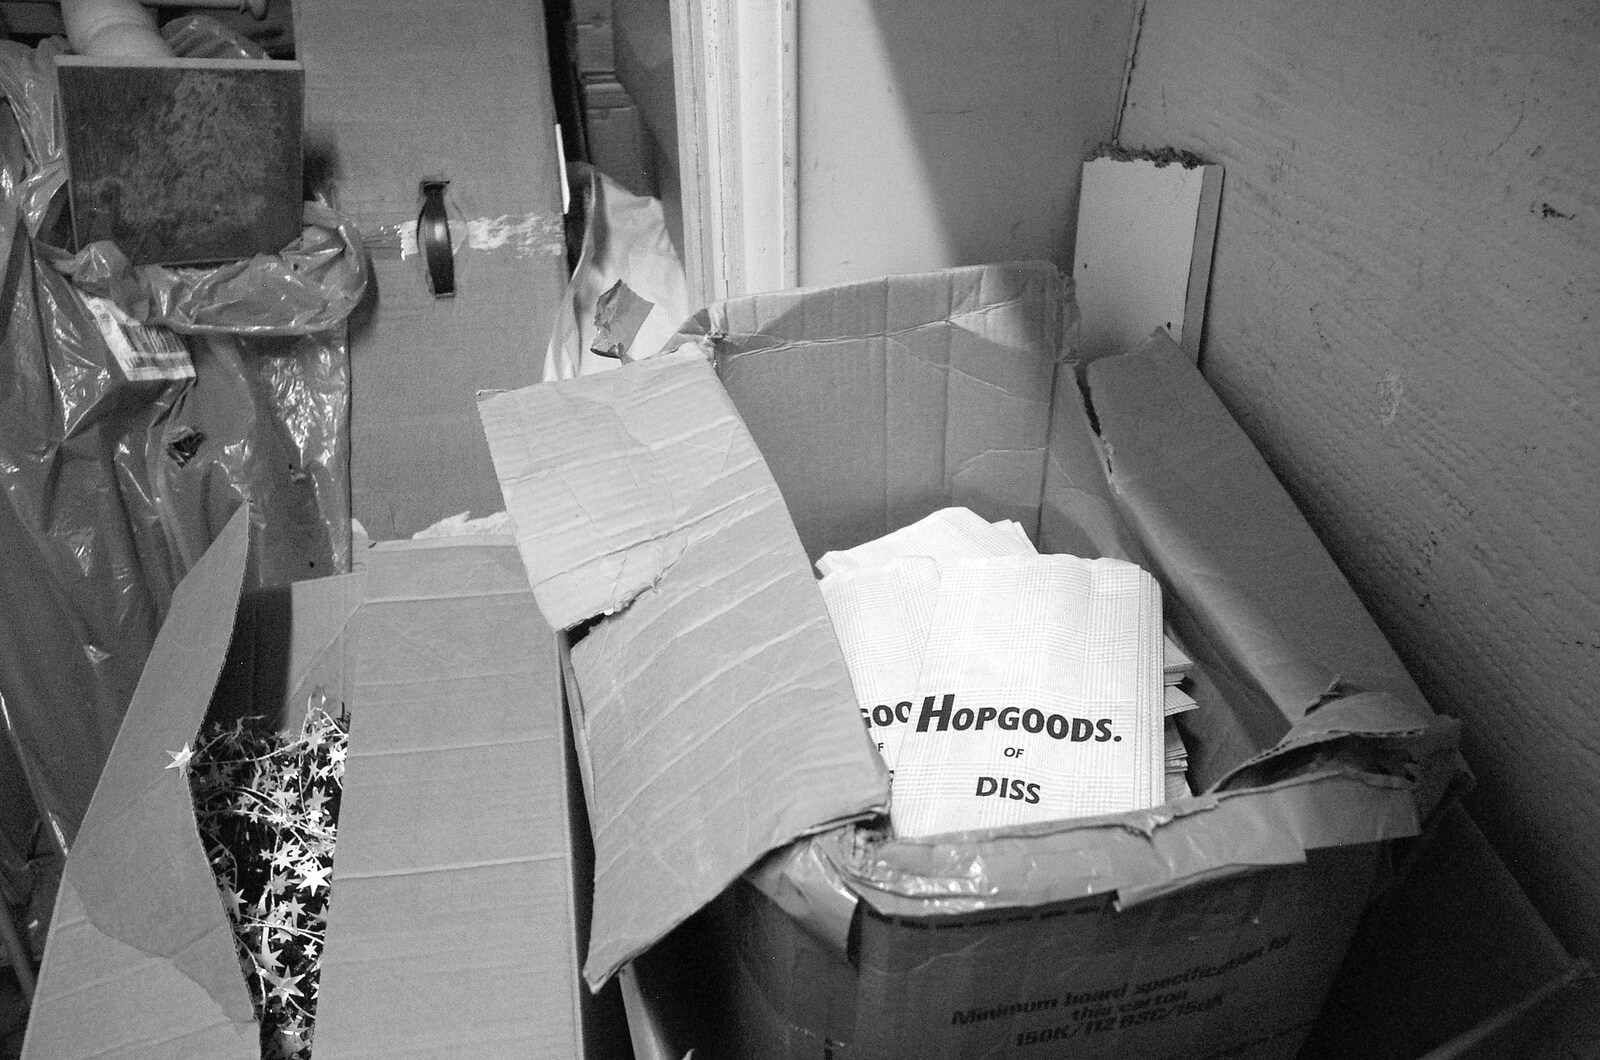 A box of Hopgoods paper bags from A Portrait of Hopgoods: Gentlemen's Outfitters, Diss, Norfolk - 4th January 2006